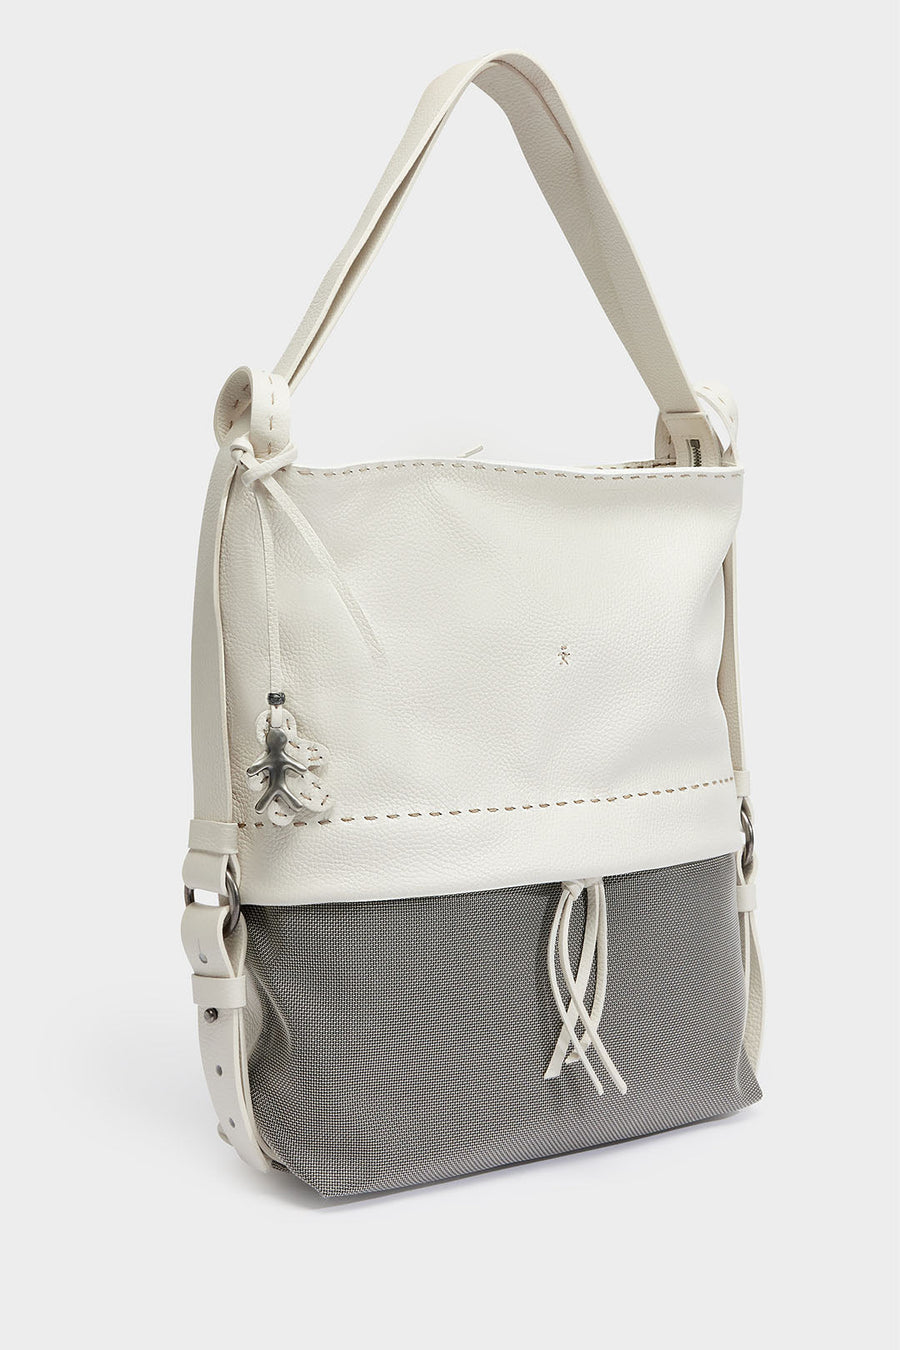 HENRY BEGUELIN ZIP FRONT LEATHER BACKPACK, WHITE - Burning Torch Online Boutique